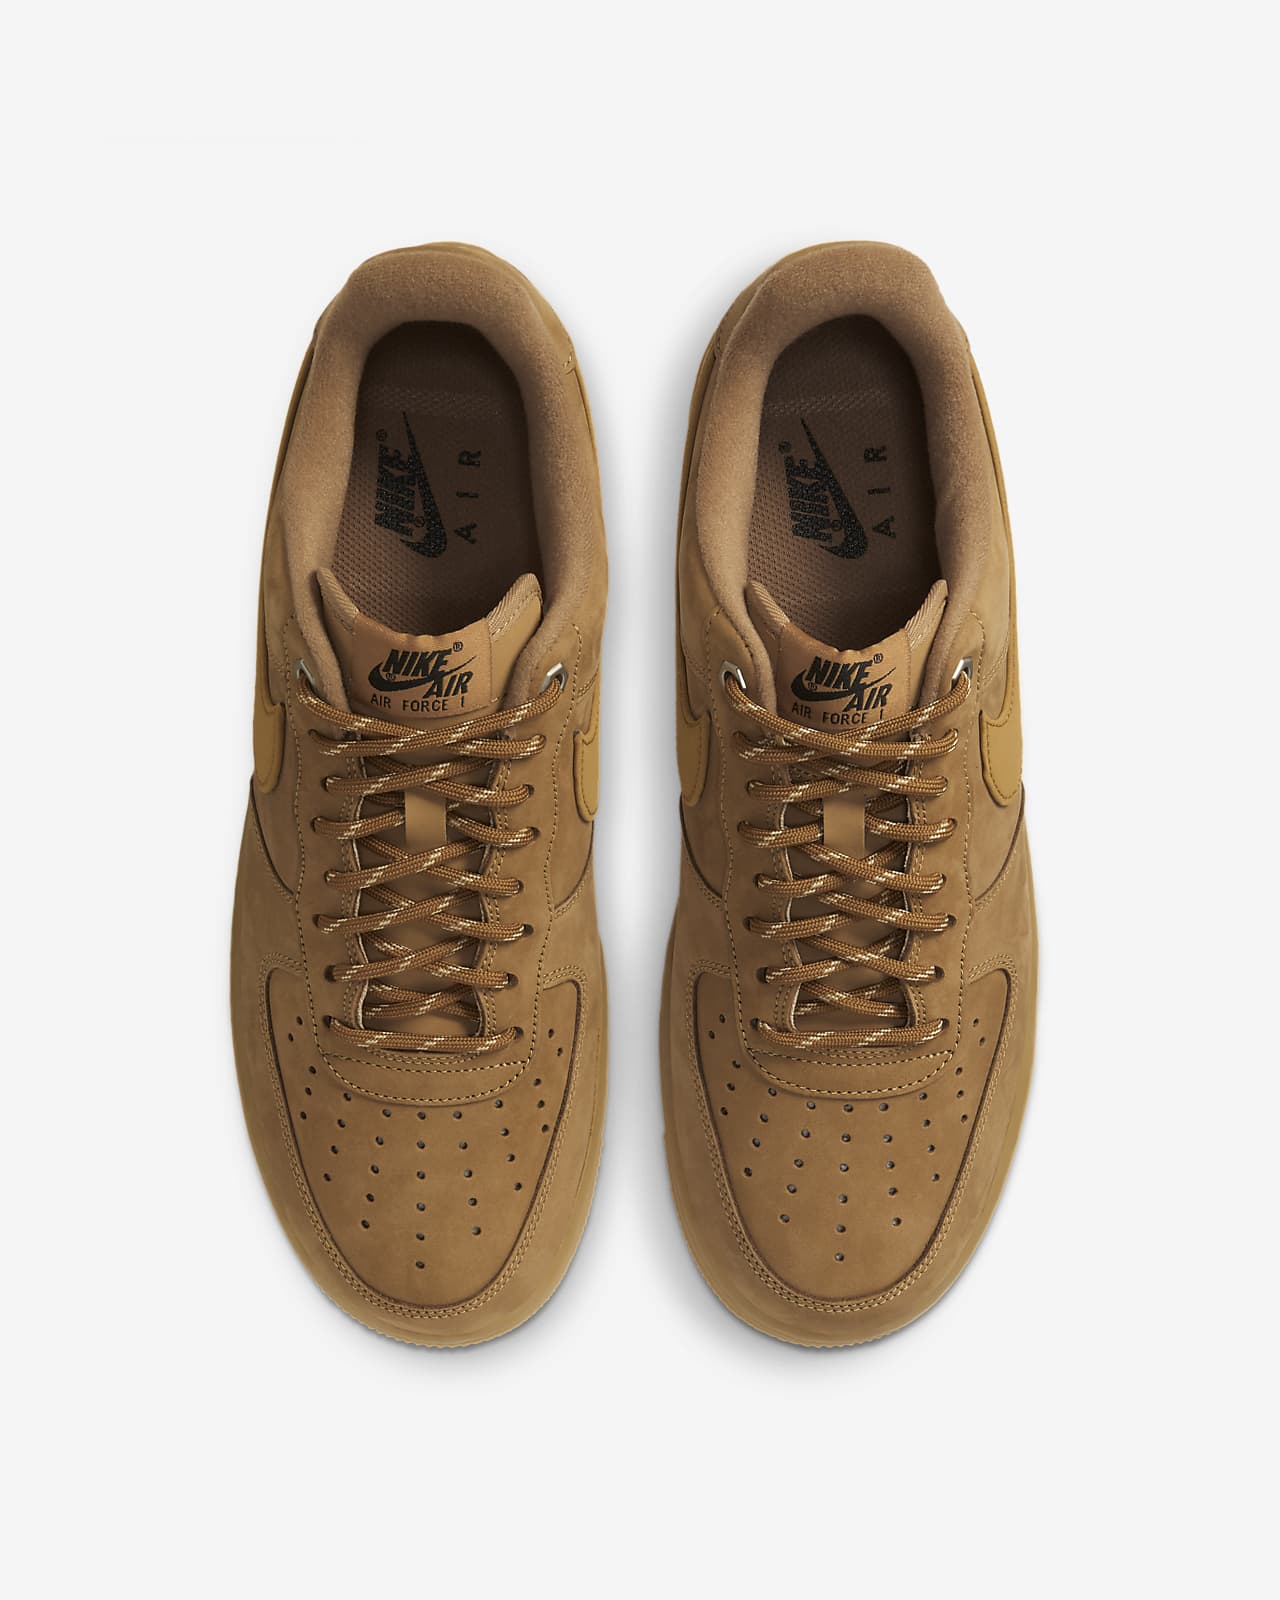 Women's Air Force 1 'Flax' (DX1193-200) Release Date. Nike SNKRS IN